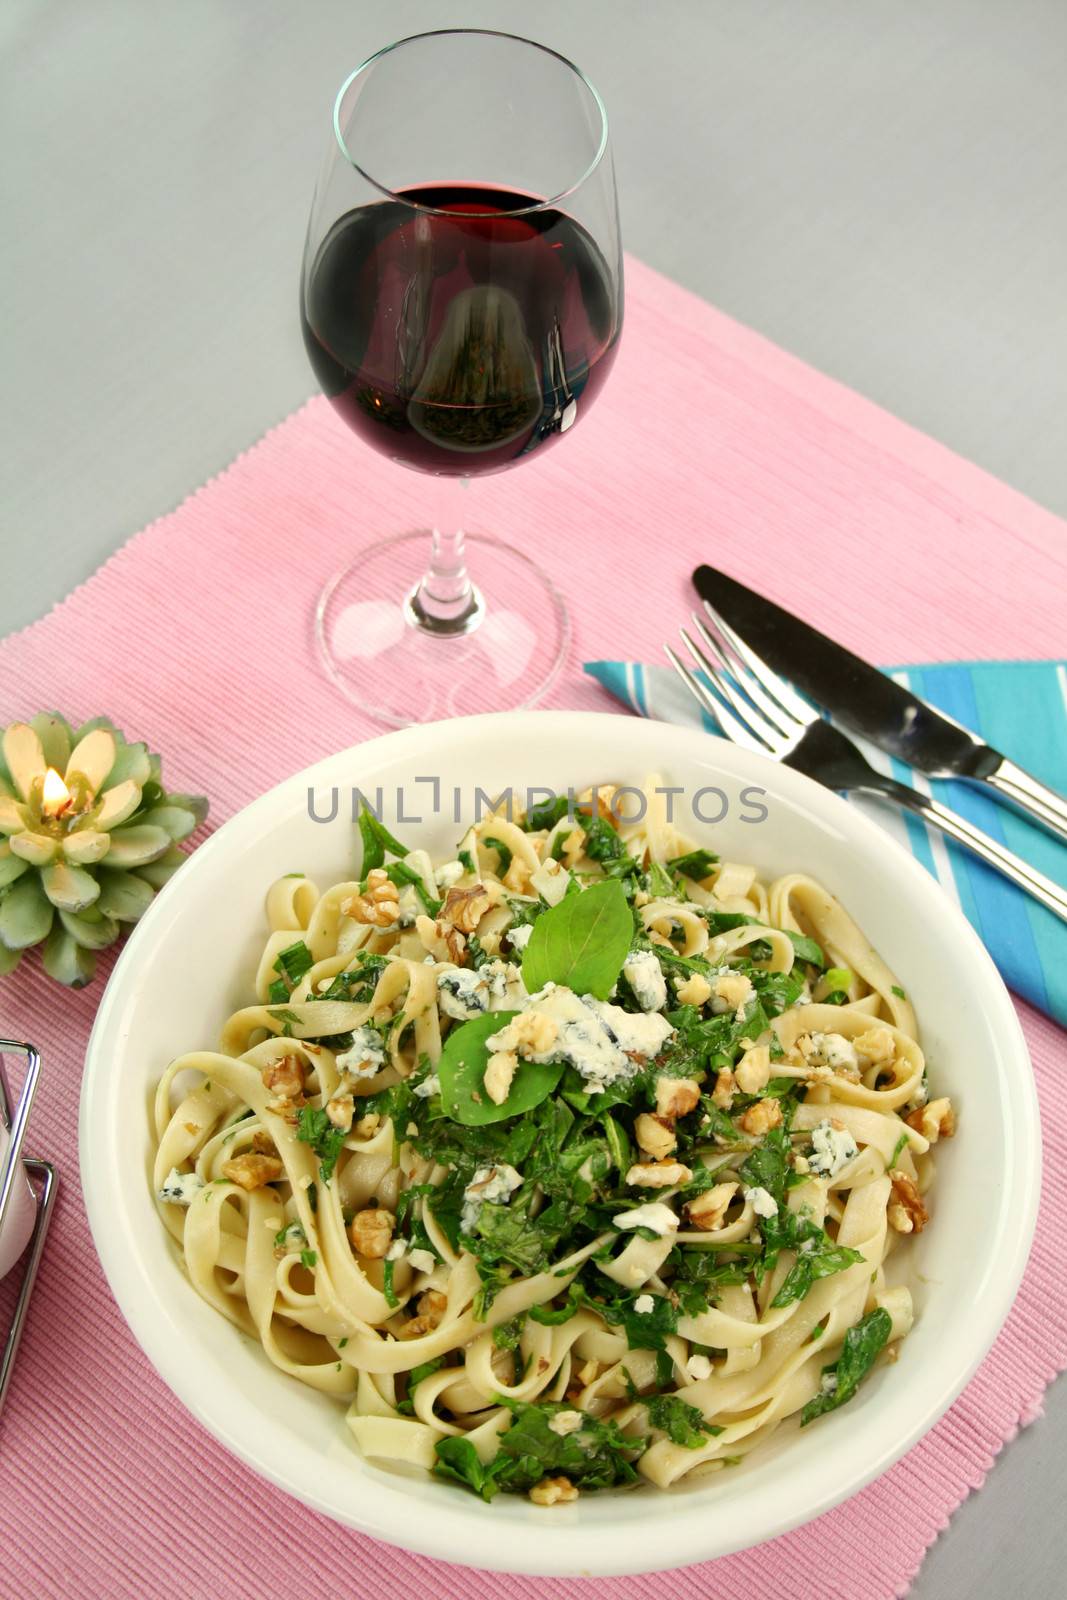 Fettucini with spinach blue cheese and walnuts with a mint garnish.